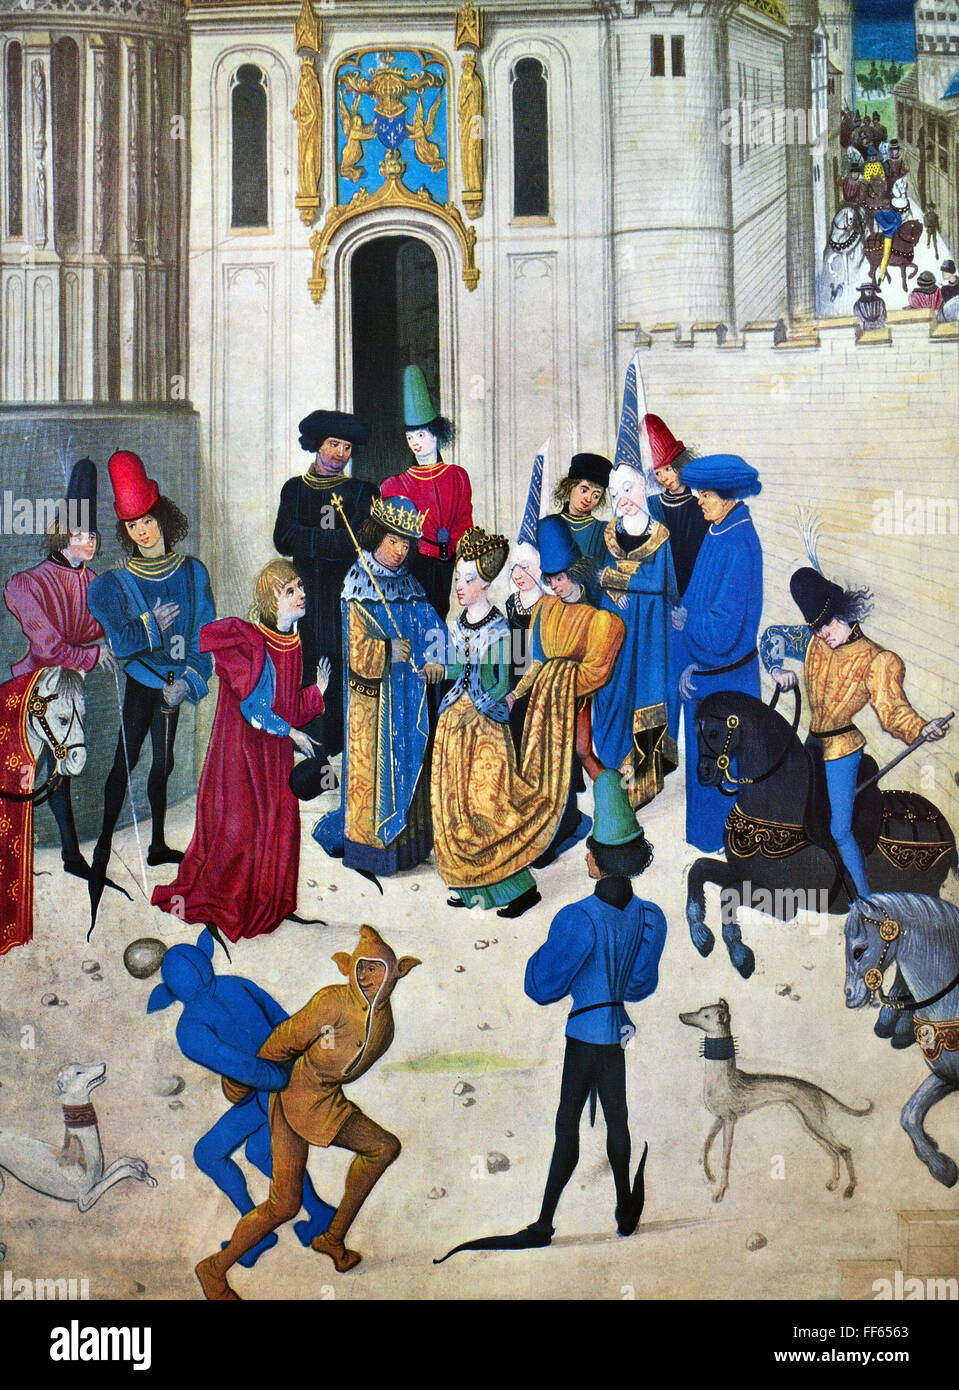 ISABELLA OF BAVARIA /n(1370-1435). Queen of Charles VI of France, 1389-1422. Isabella entering Paris, France. Manuscript illumination, French, 15th century. Stock Photo